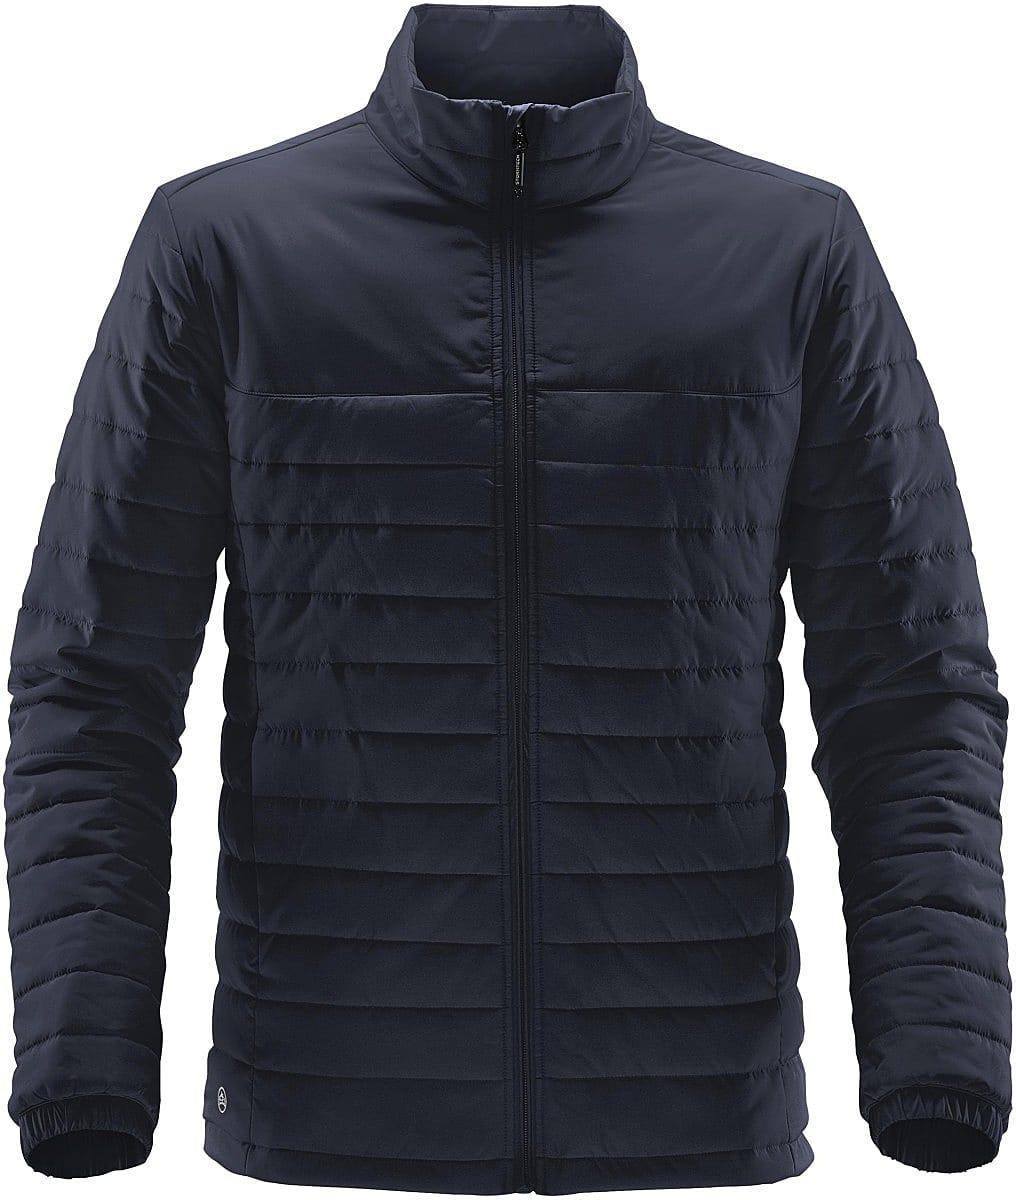 Stormtech Mens Nautilus Jacket in Navy Blue (Product Code: QX-1)